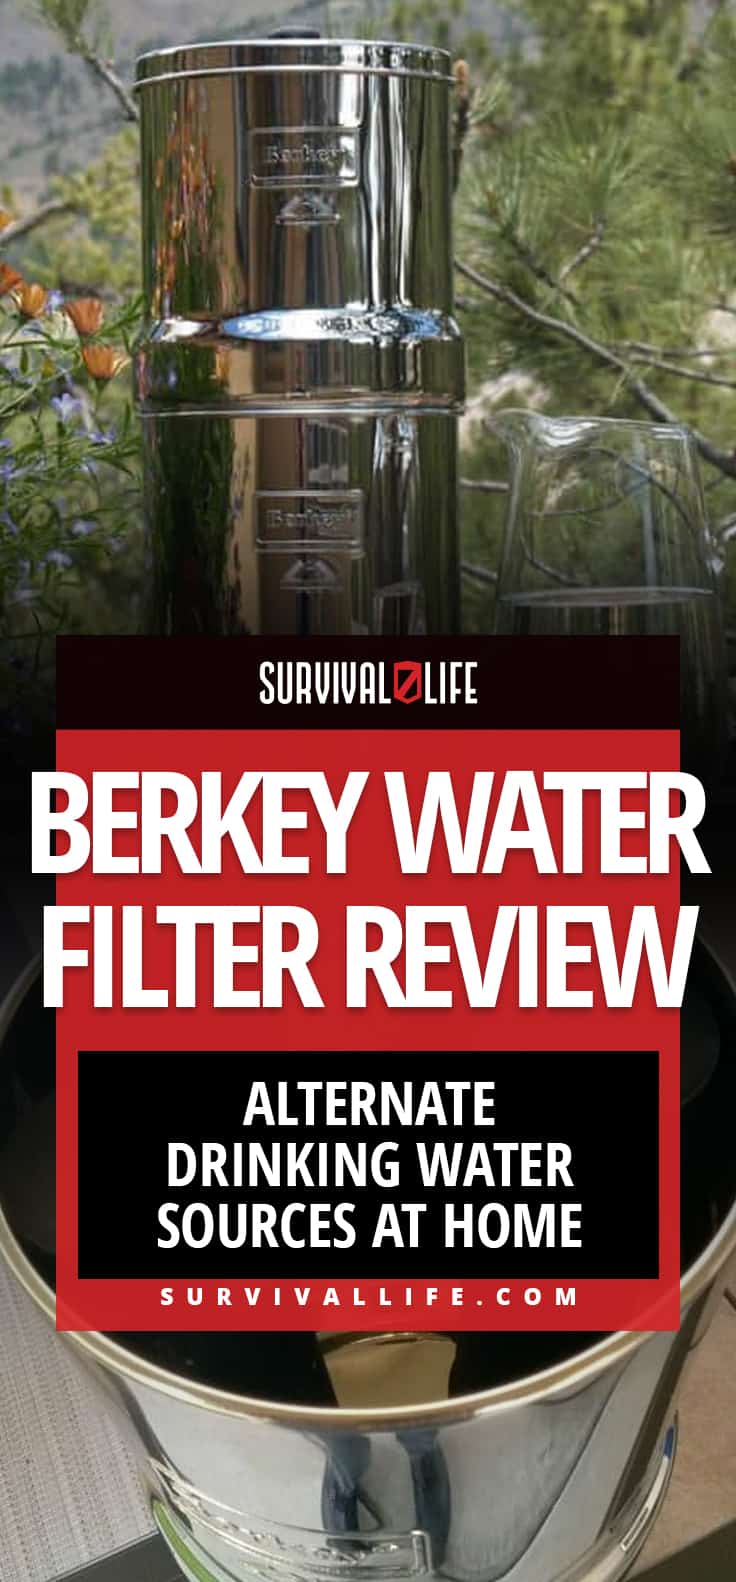 Berkey Water Filter Review | Alternate Drinking Water Sources At Home